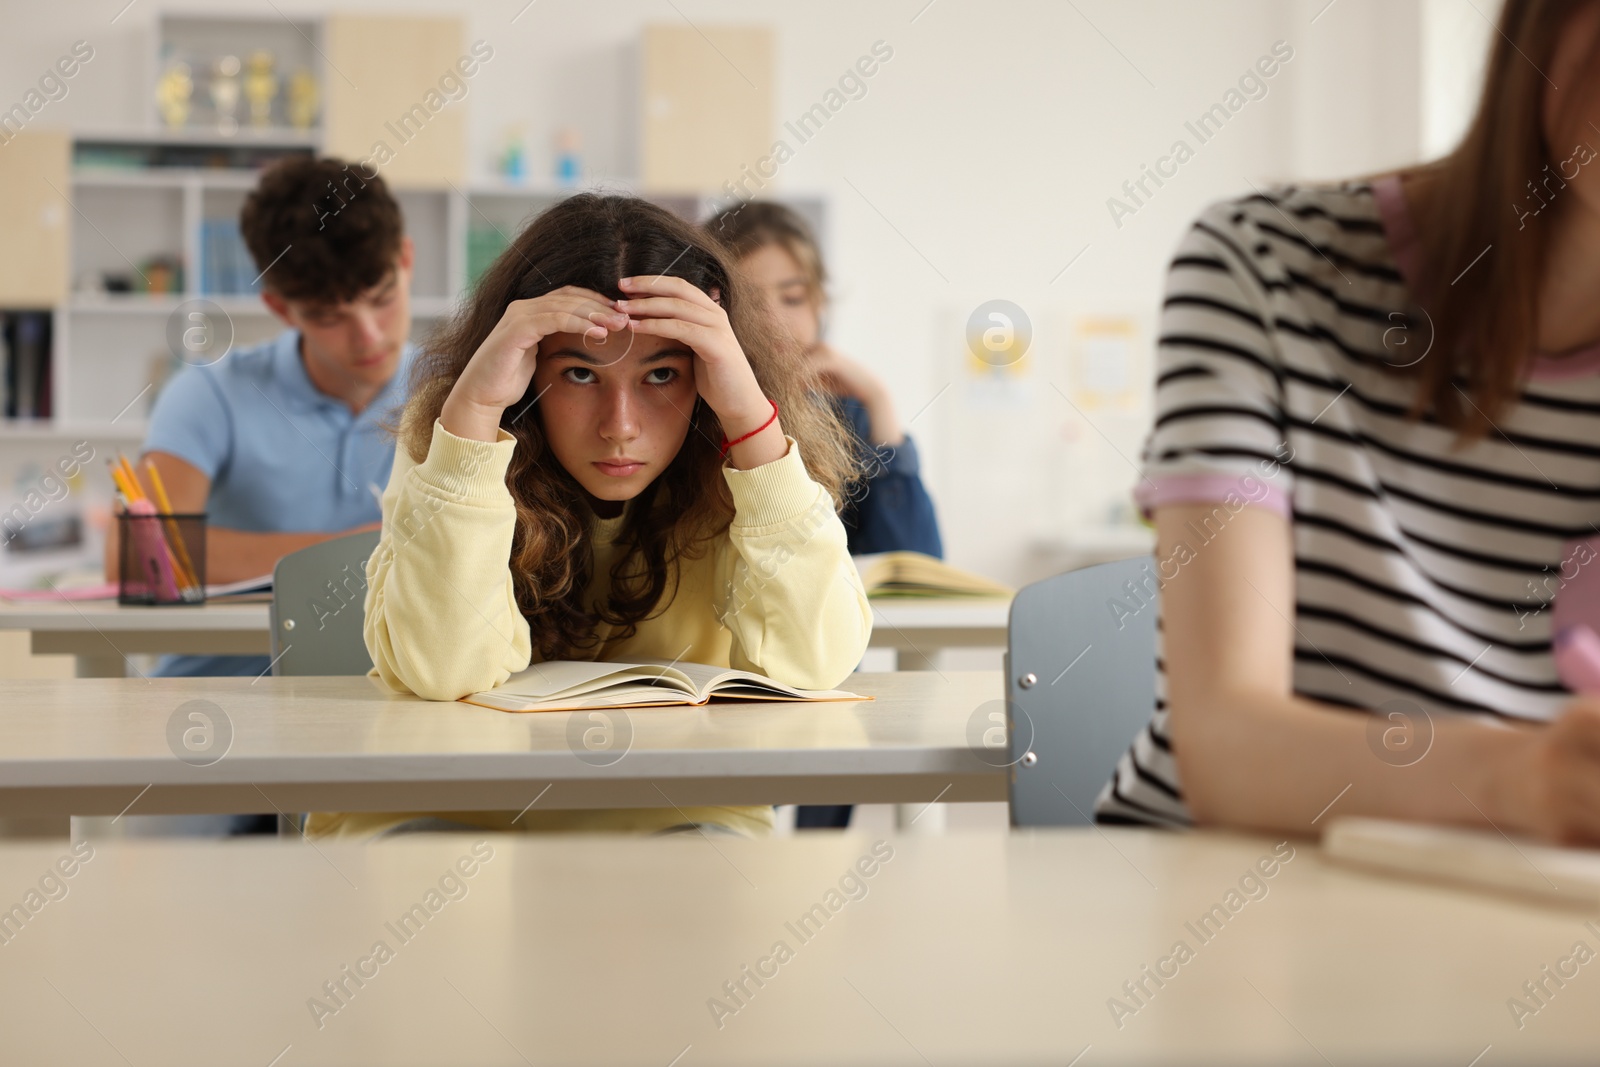 Photo of Teen problems. Lonely girl sitting separately from other students in classroom